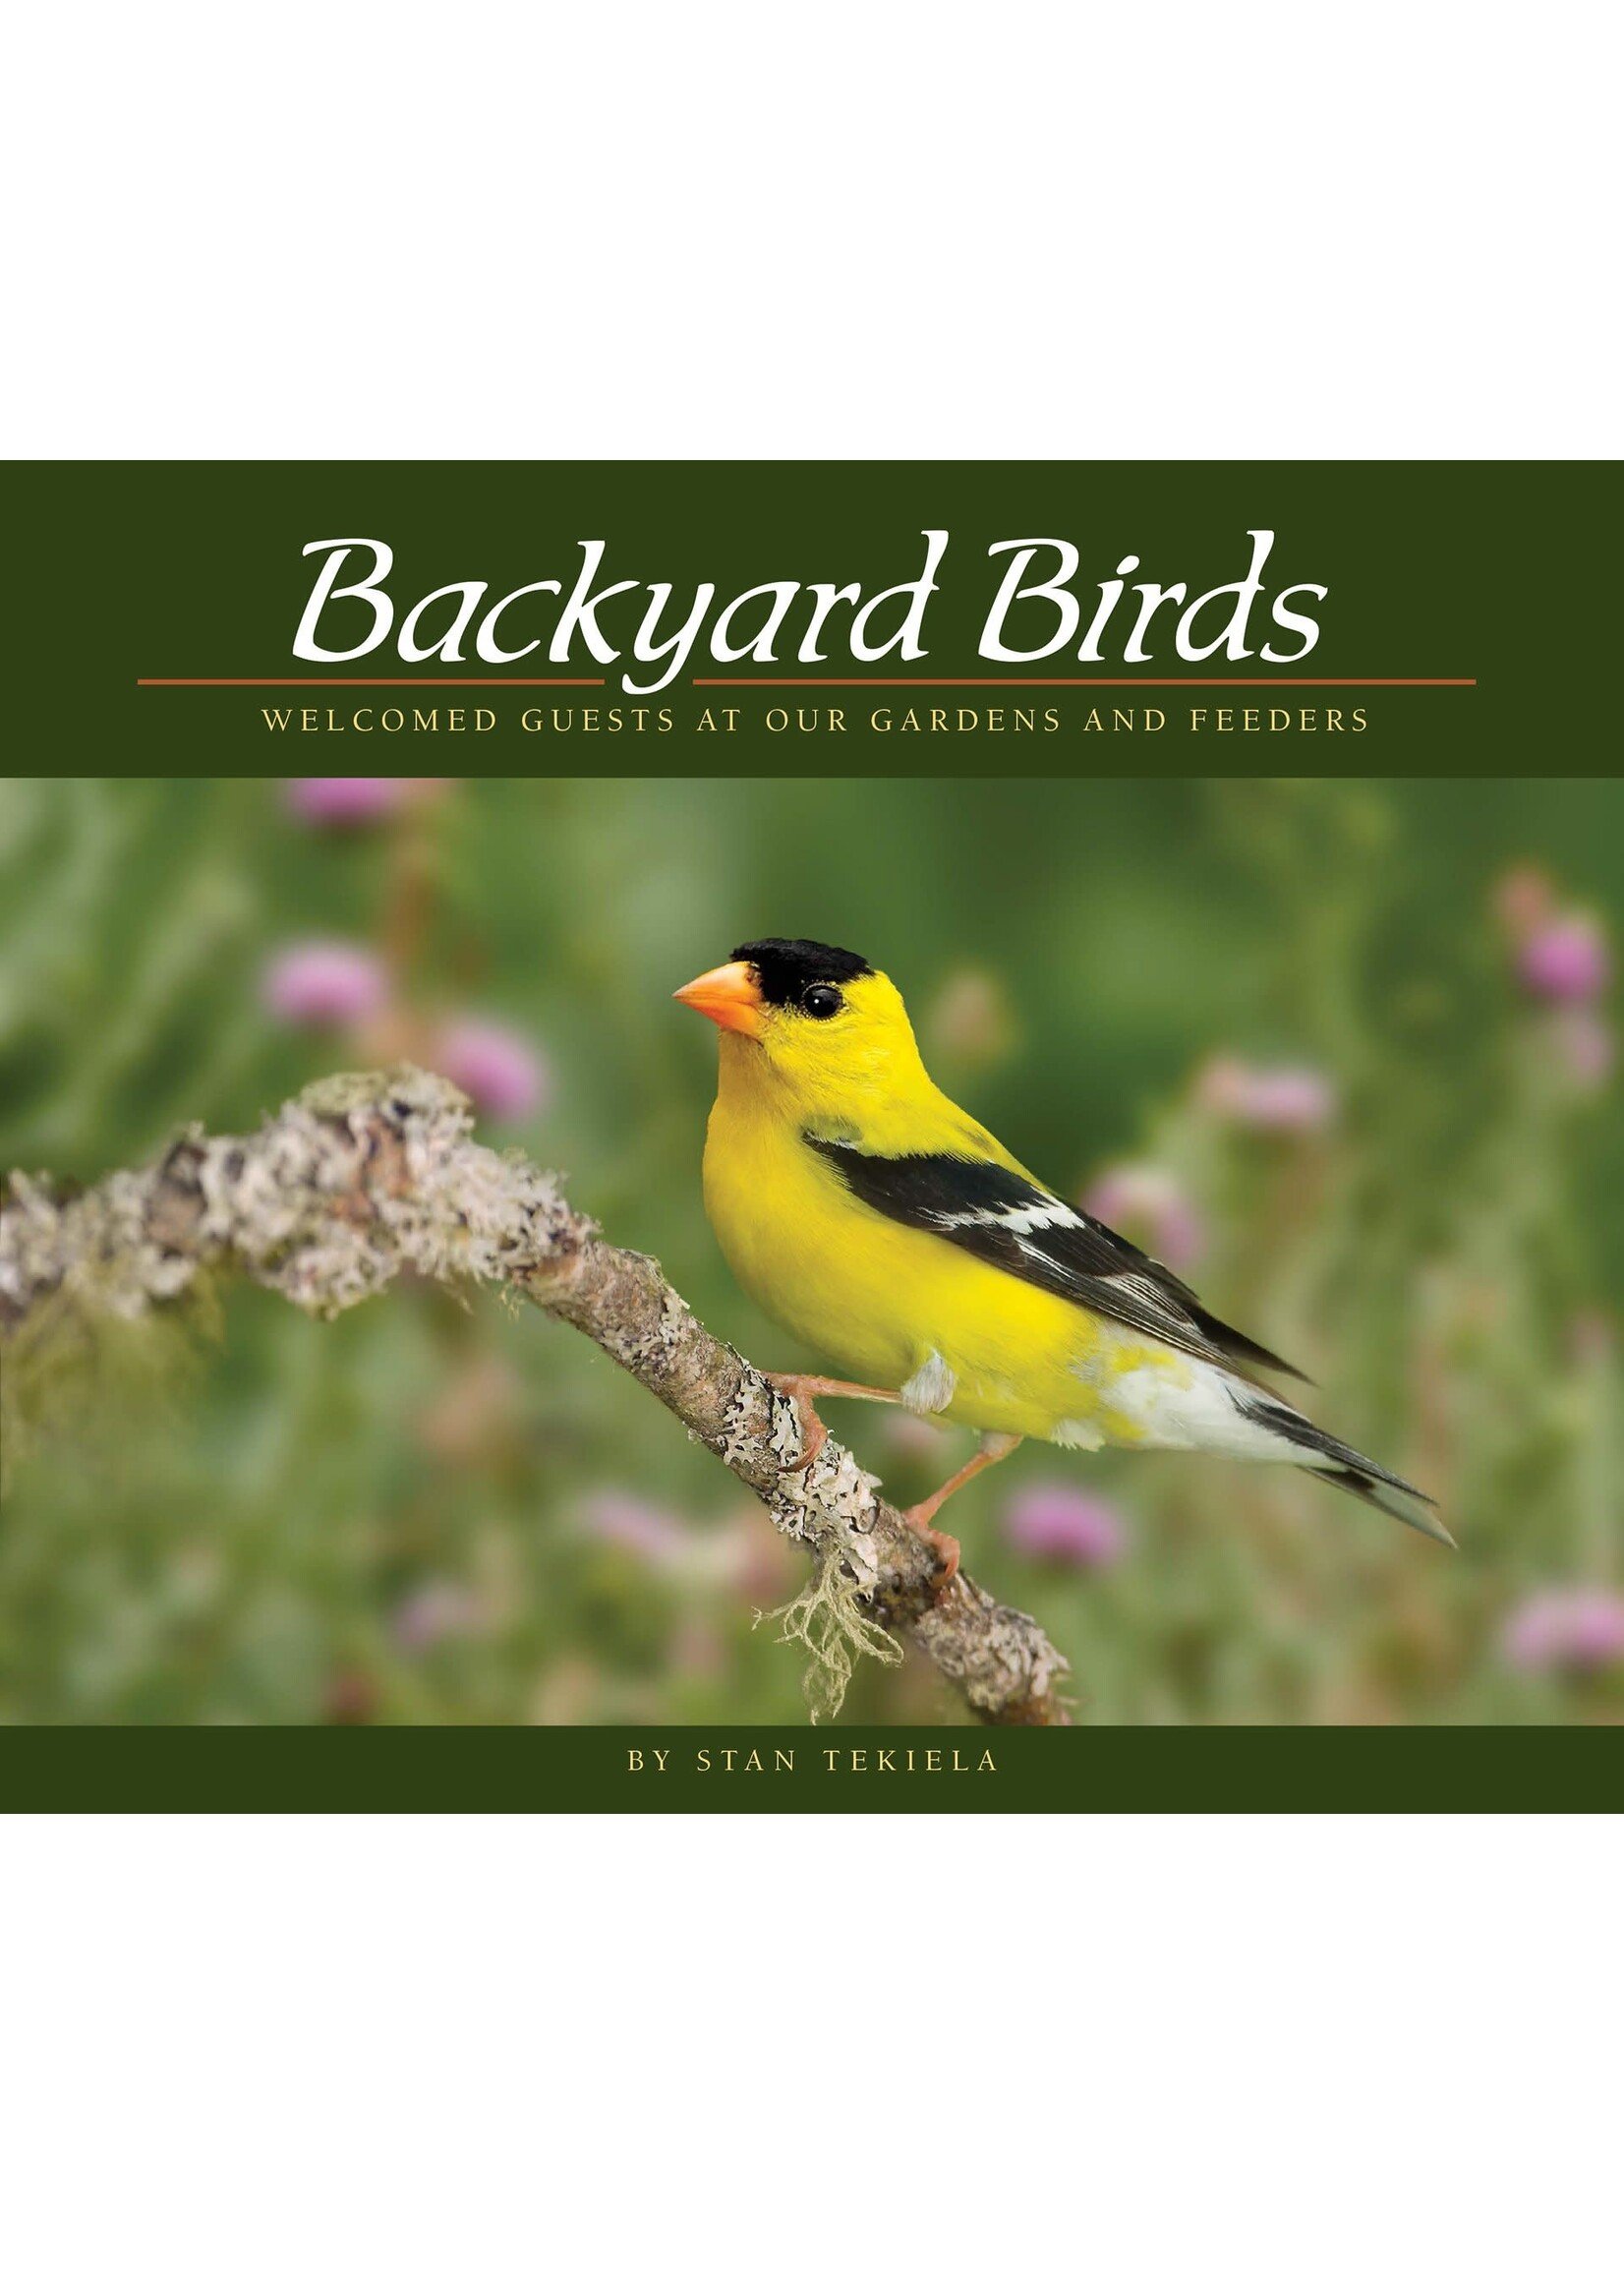 Backyard Birds: Welcomed Guests at Our Gardens and Feeders